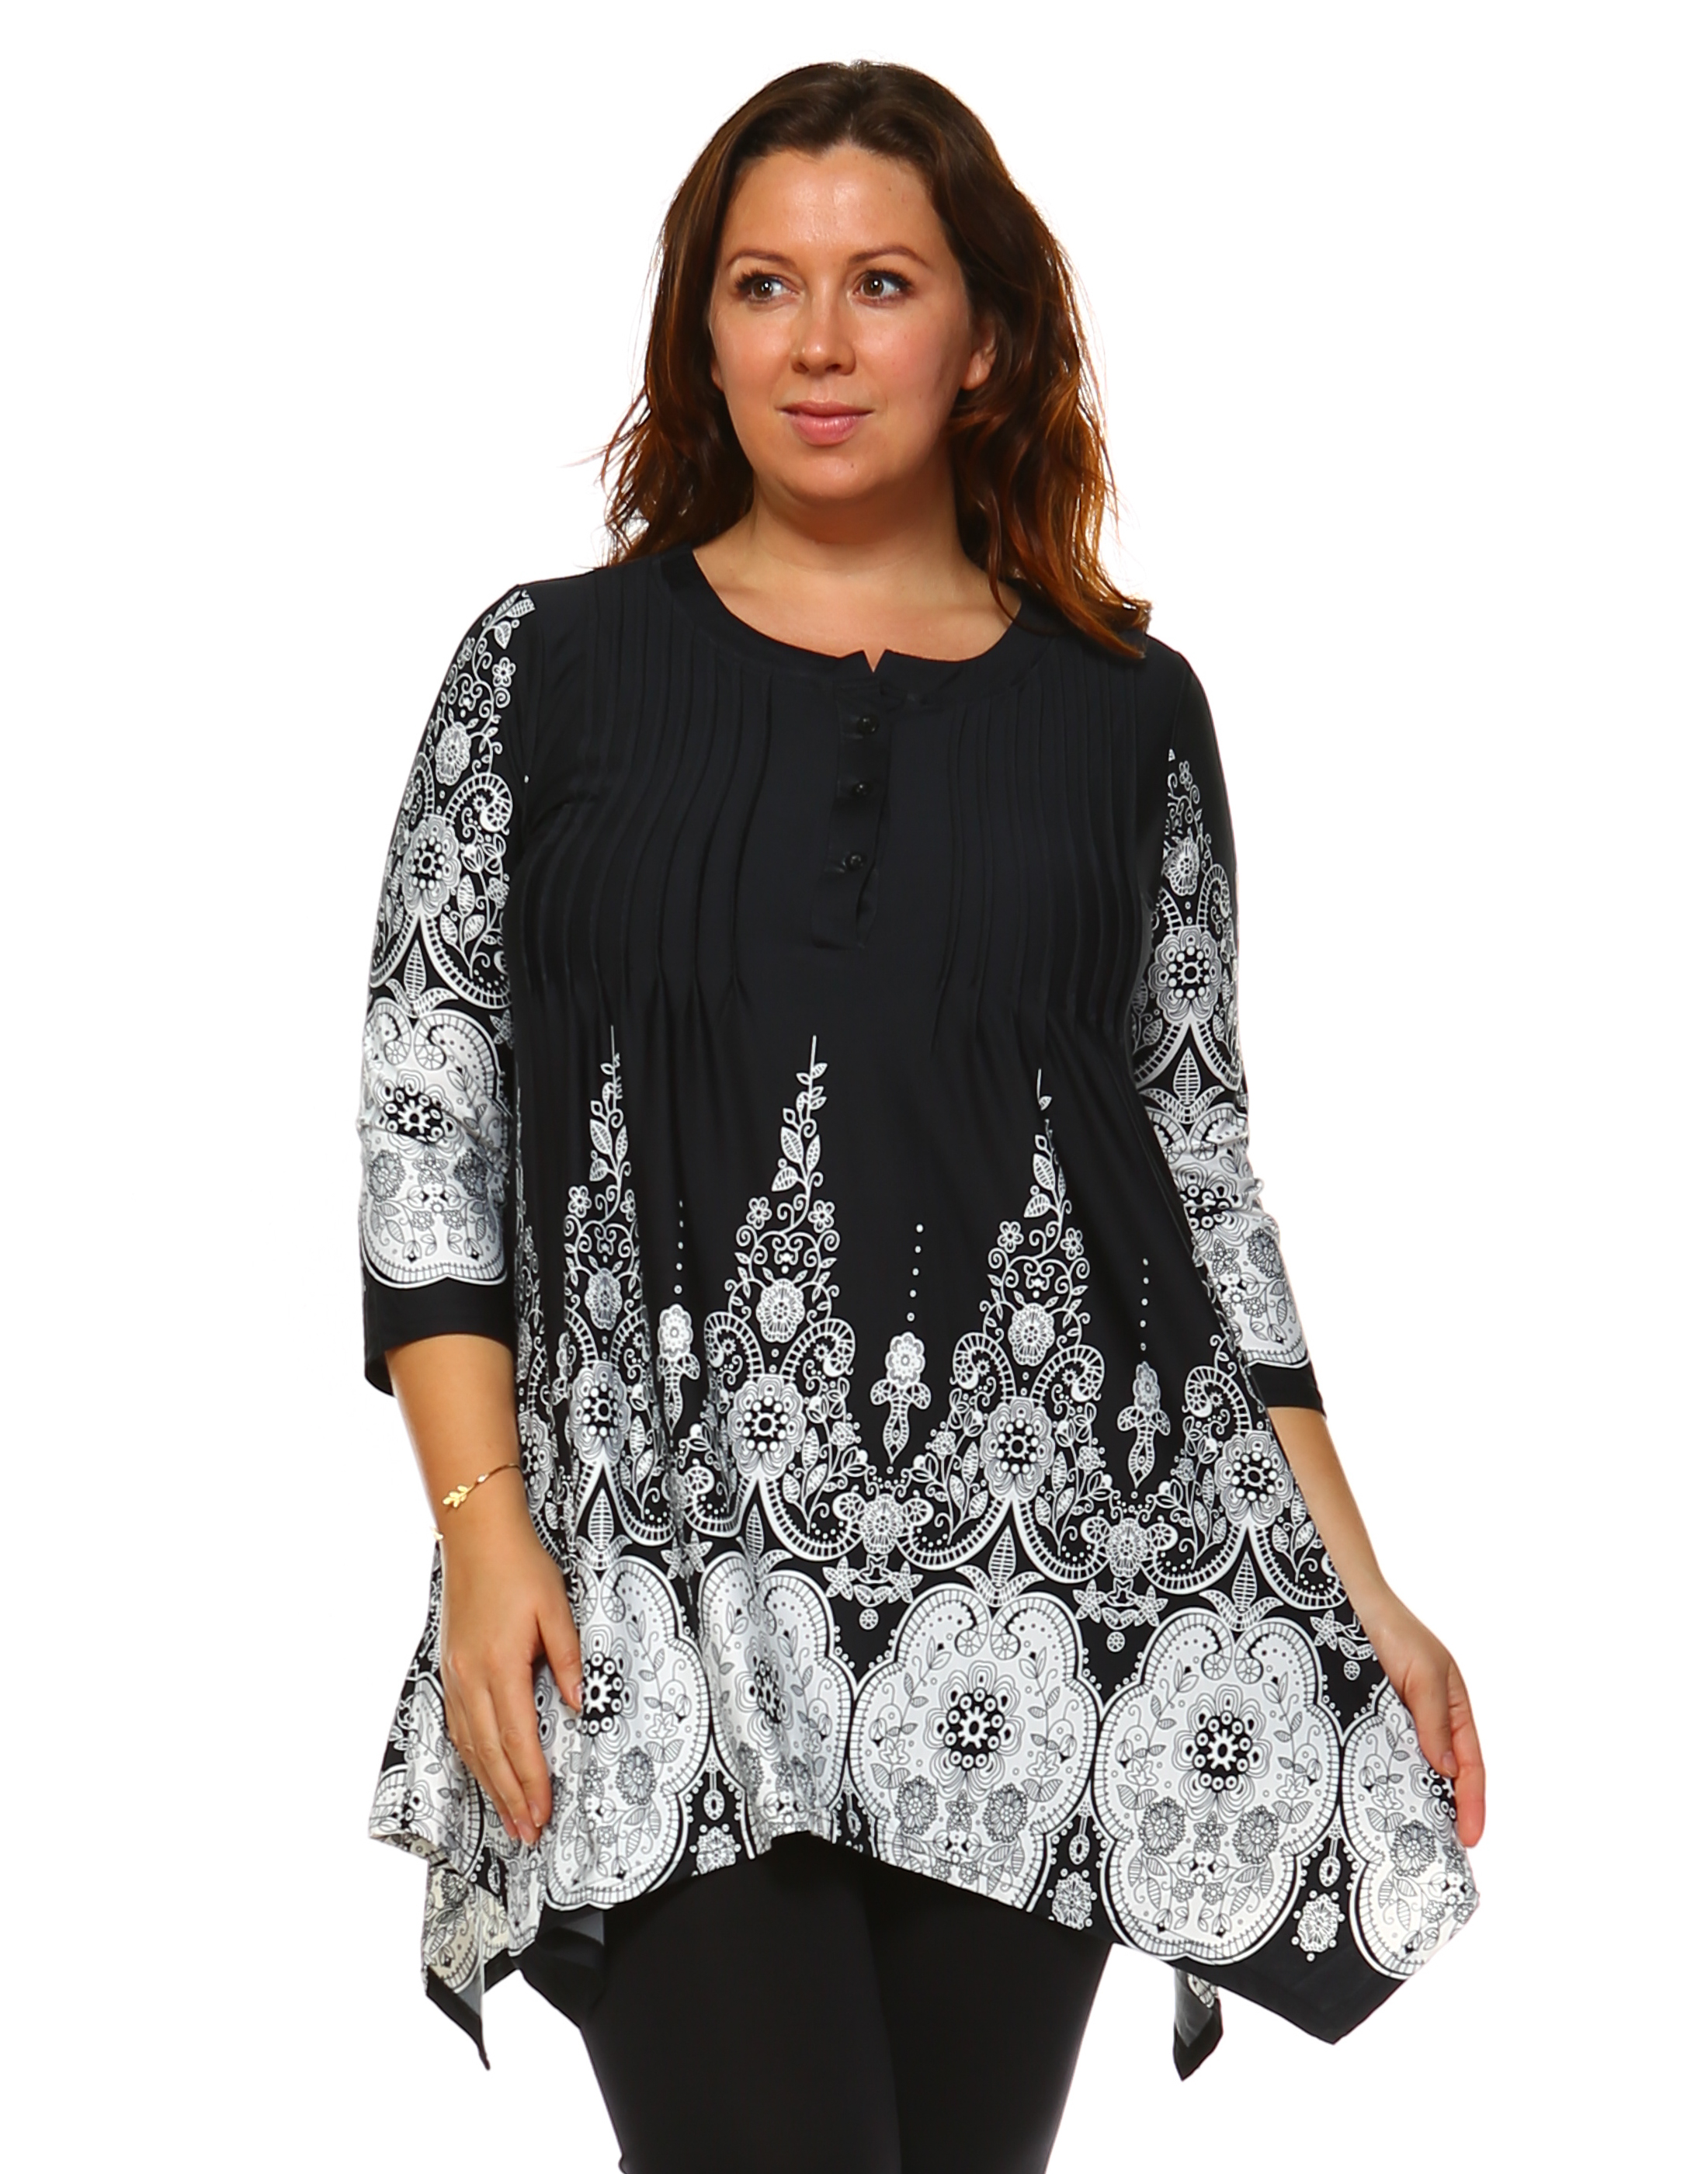 Tunics for women over 70 plus size clothes – : Online Shopping ...